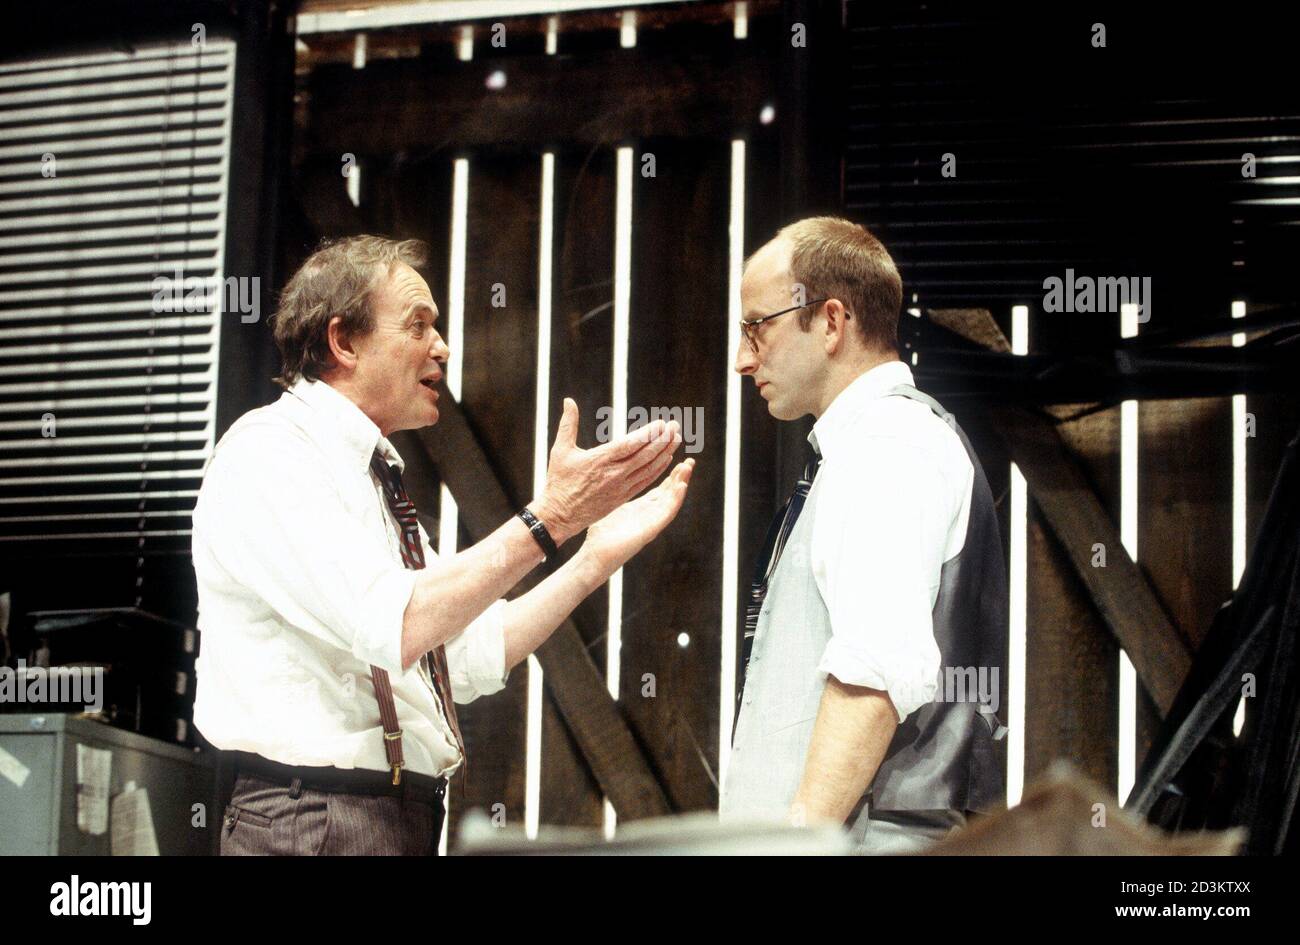 l-r: James Bolam (Shelly Levene), William Armstrong (John Williamson) in GLENGARRY GLEN ROSS by David Mamet at the Donmar Warehouse, London WC2  06/1994  design: Johann Engels  director: Sam Mendes Stock Photo